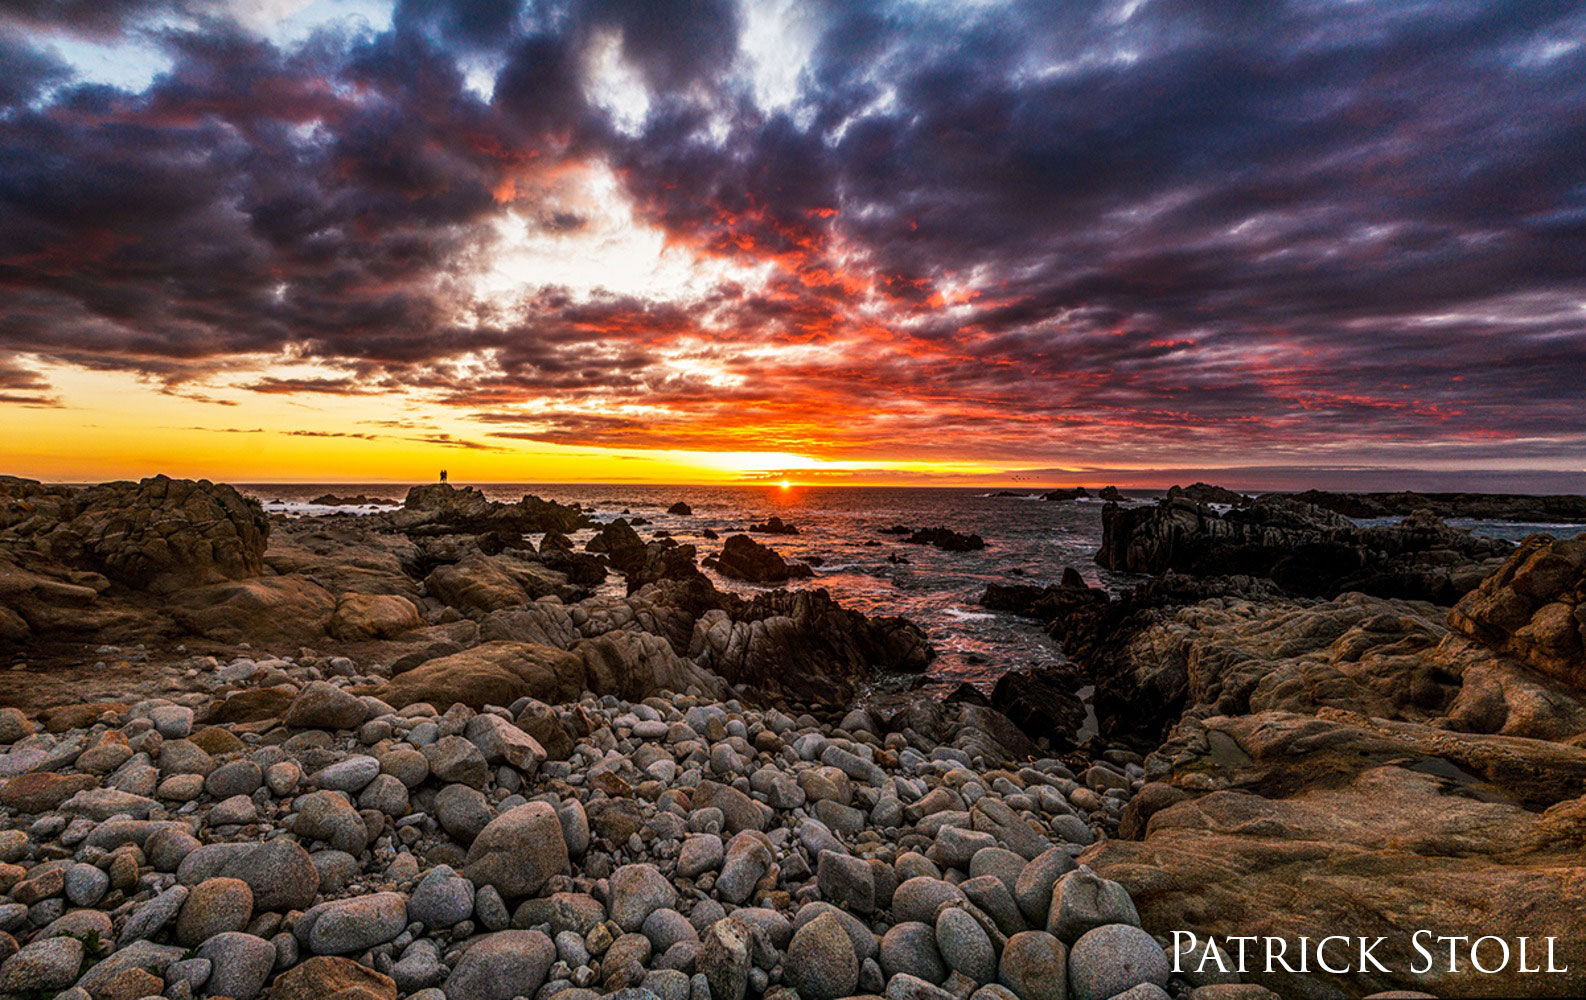 Two people watch the sunset on a rocky shore.